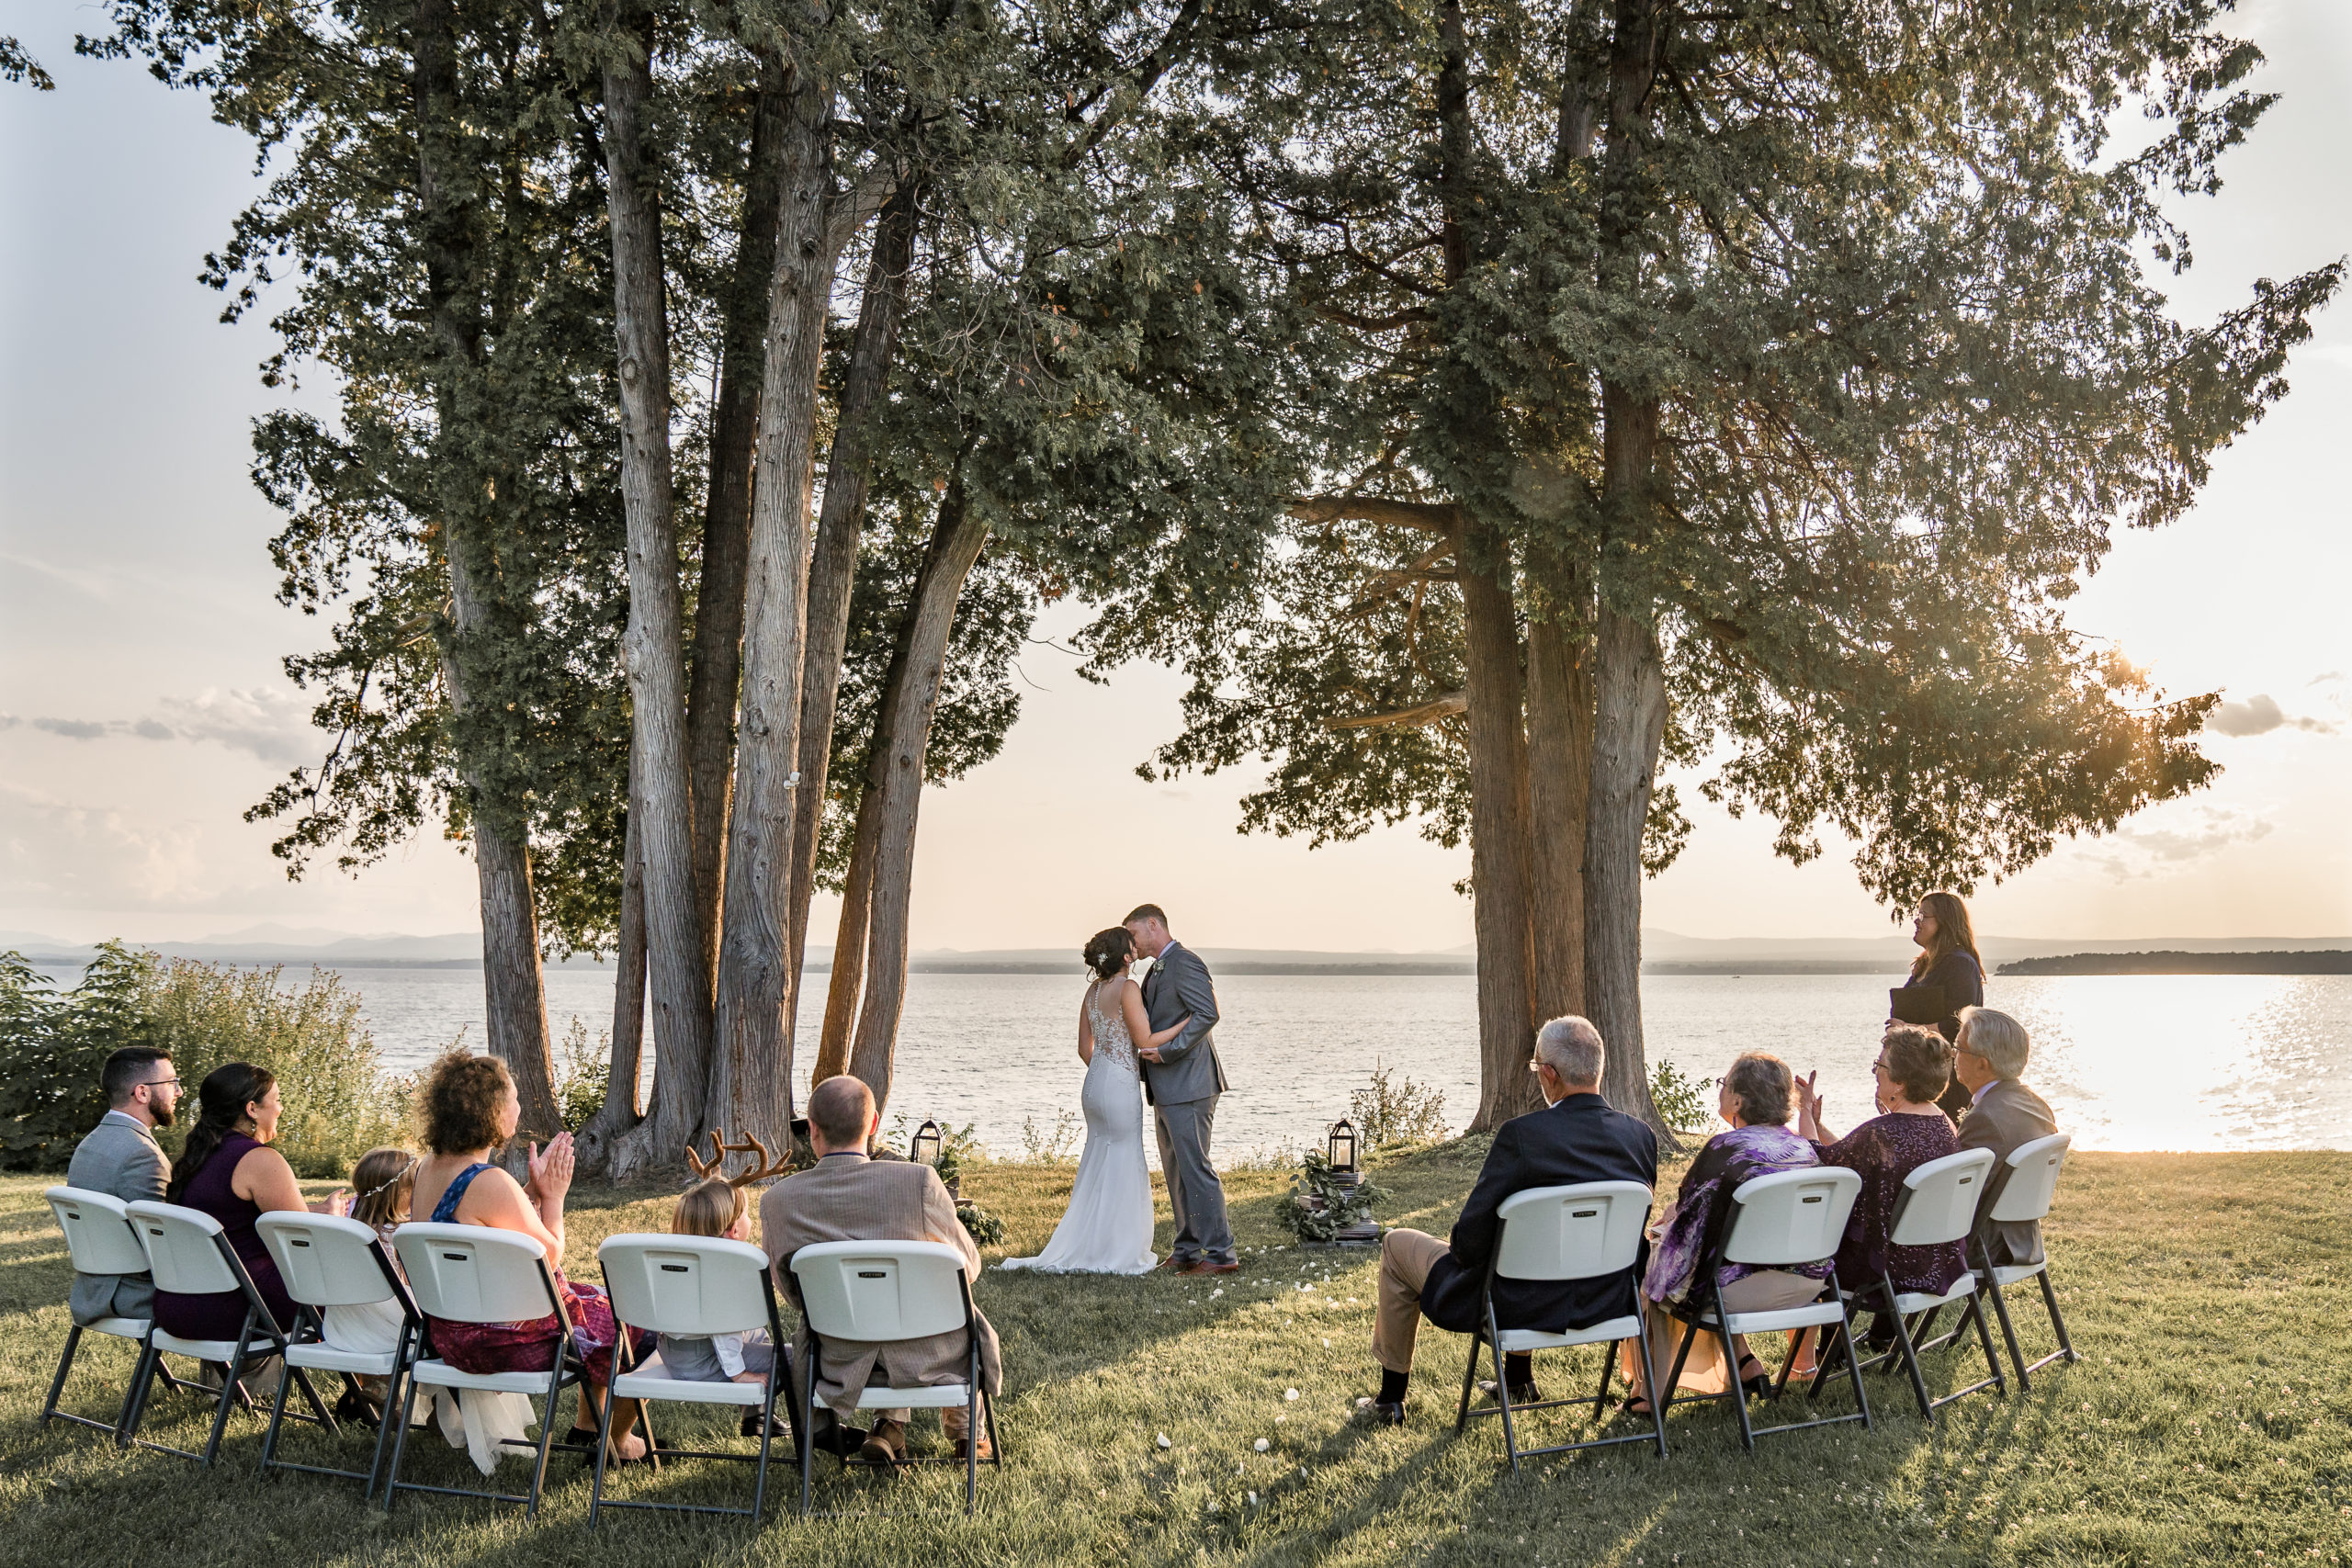 Lauren And Eric Exchange Vows At Their Lake Champlain Elopement.